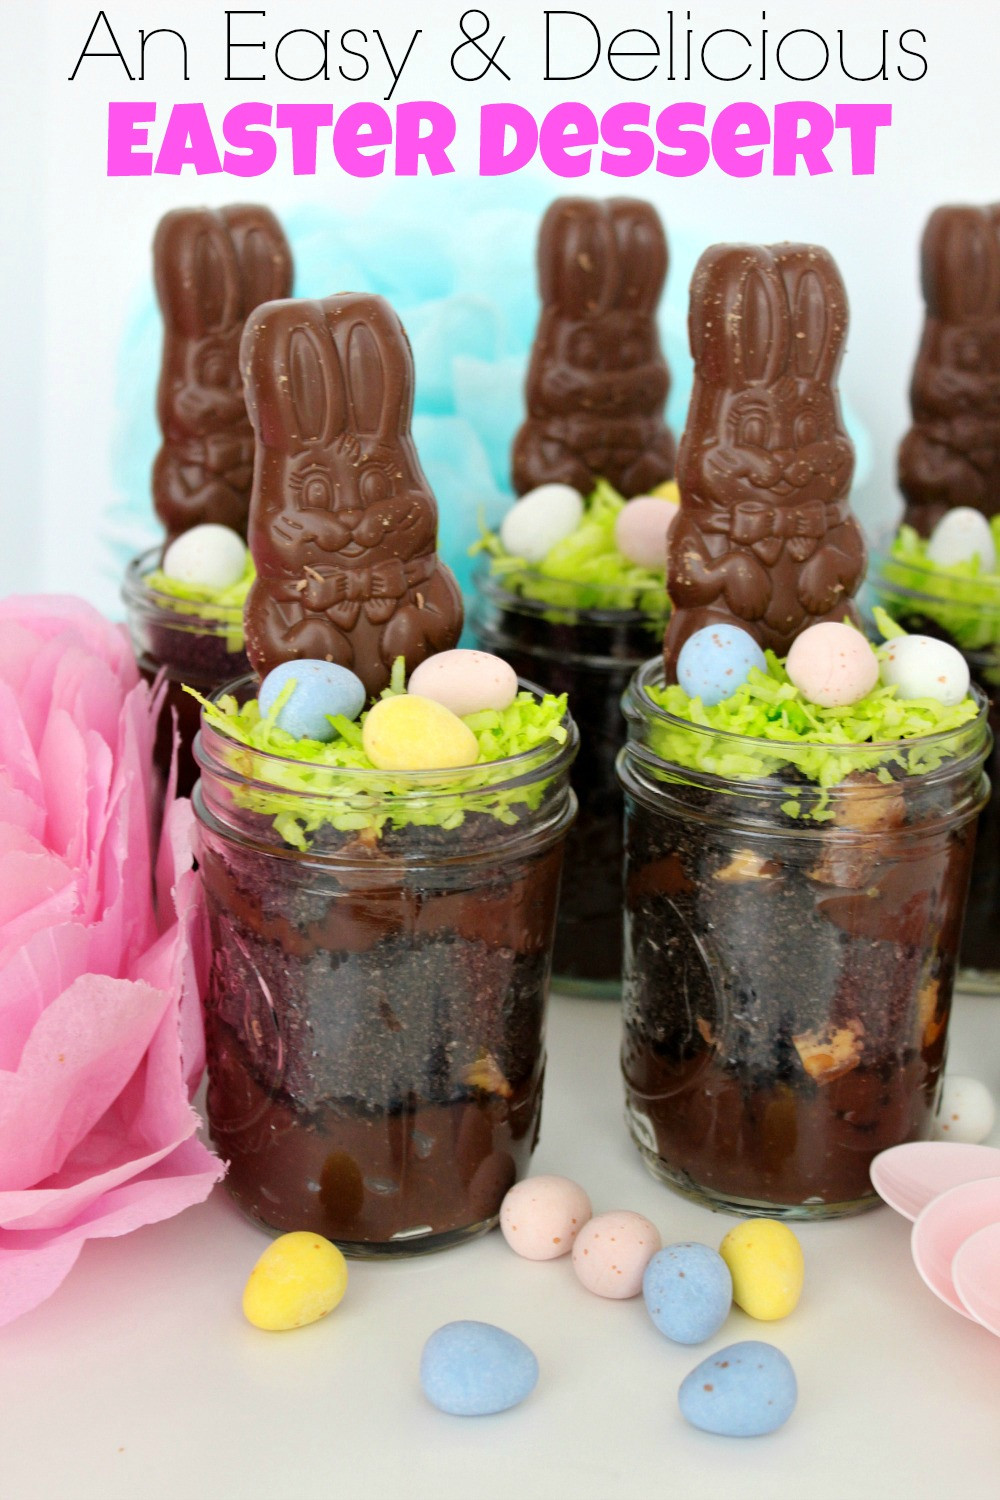 Great Easter Desserts
 An Easy & Delicious Easter Dessert Using Classic and New